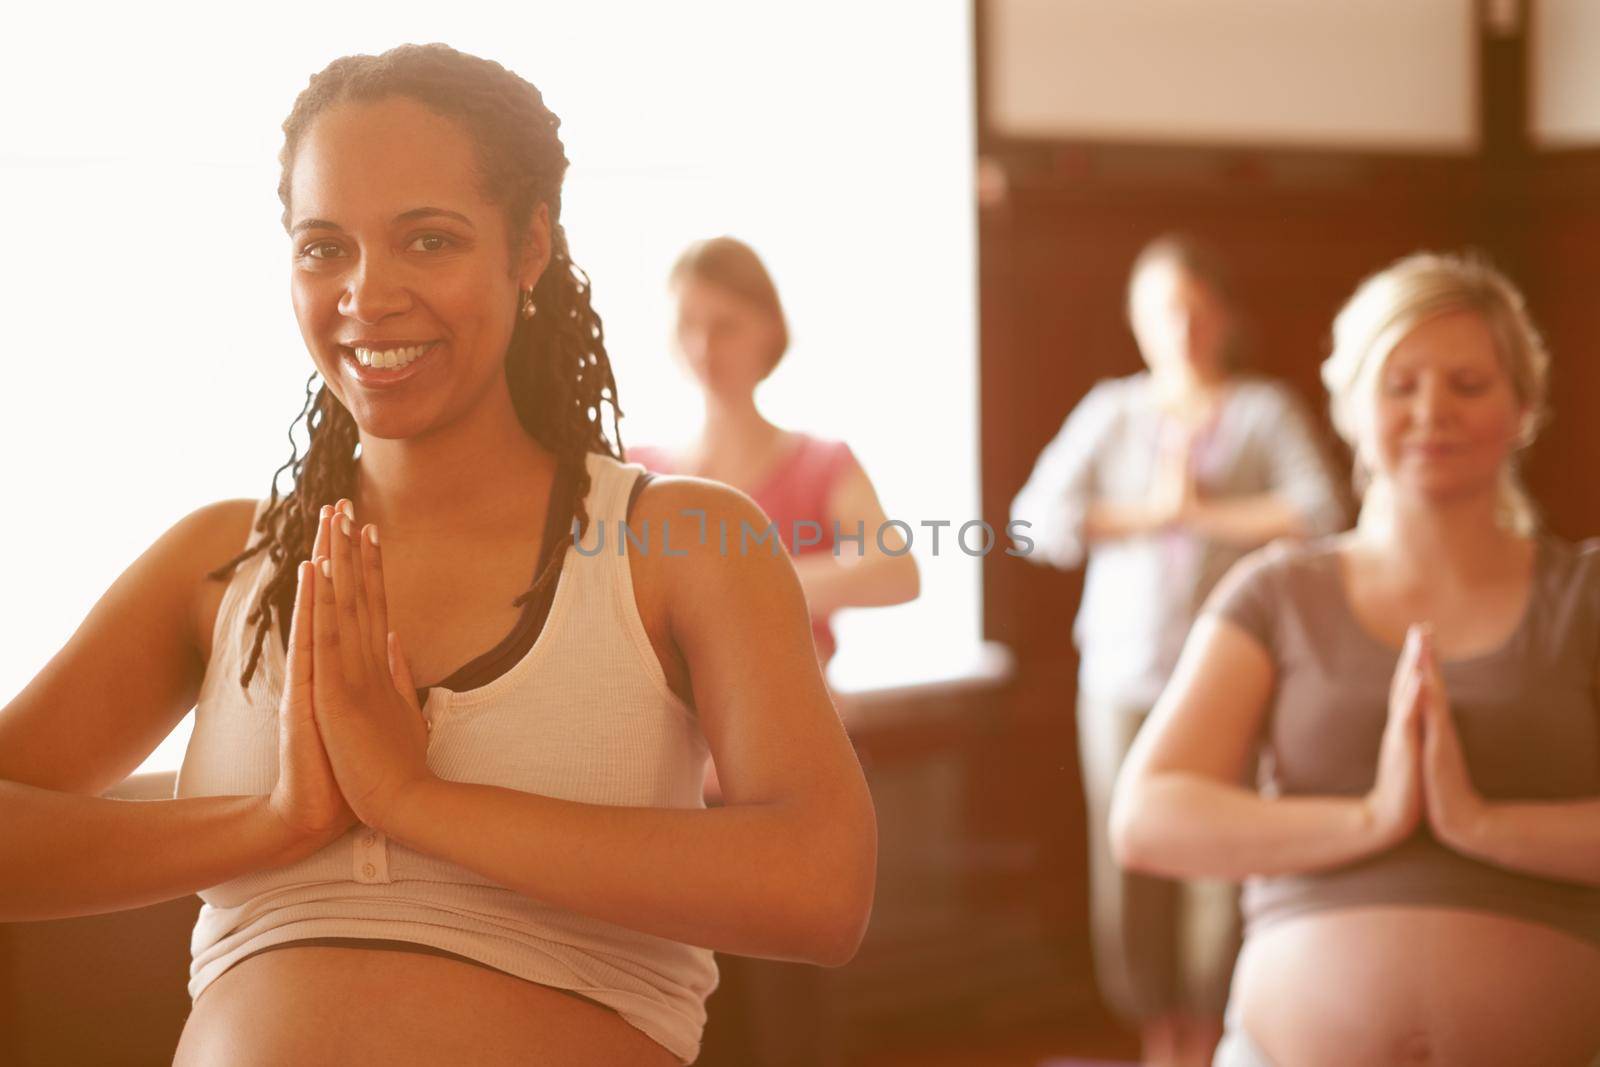 Yoga, wellness and meditation of pregnant women with prayer hands sign for spiritual, calm and healthy lifestyle. Happy personal trainer meditate in yoga class, welcome smile in a zen studio portrait.